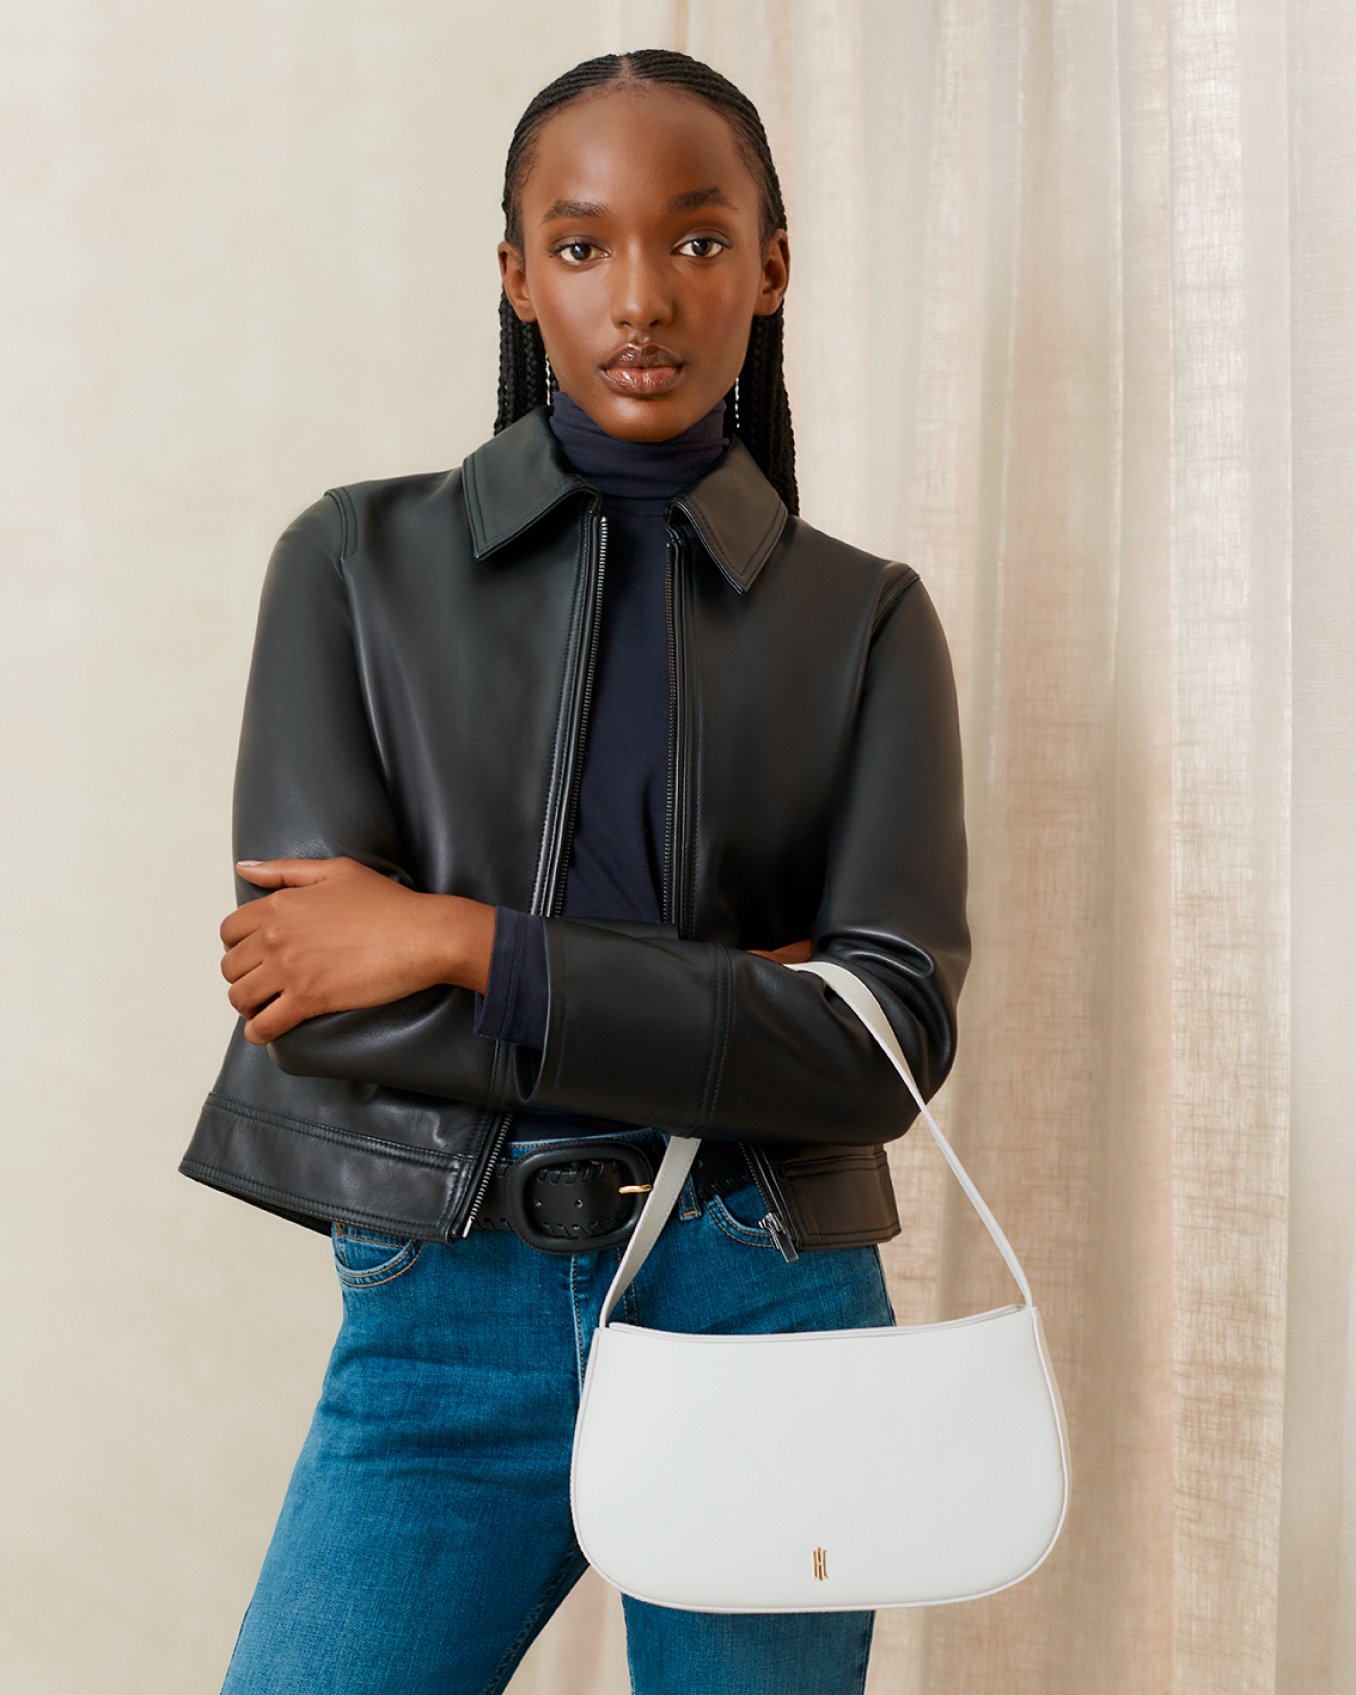 Hobbs model wears a black leather collared jacket